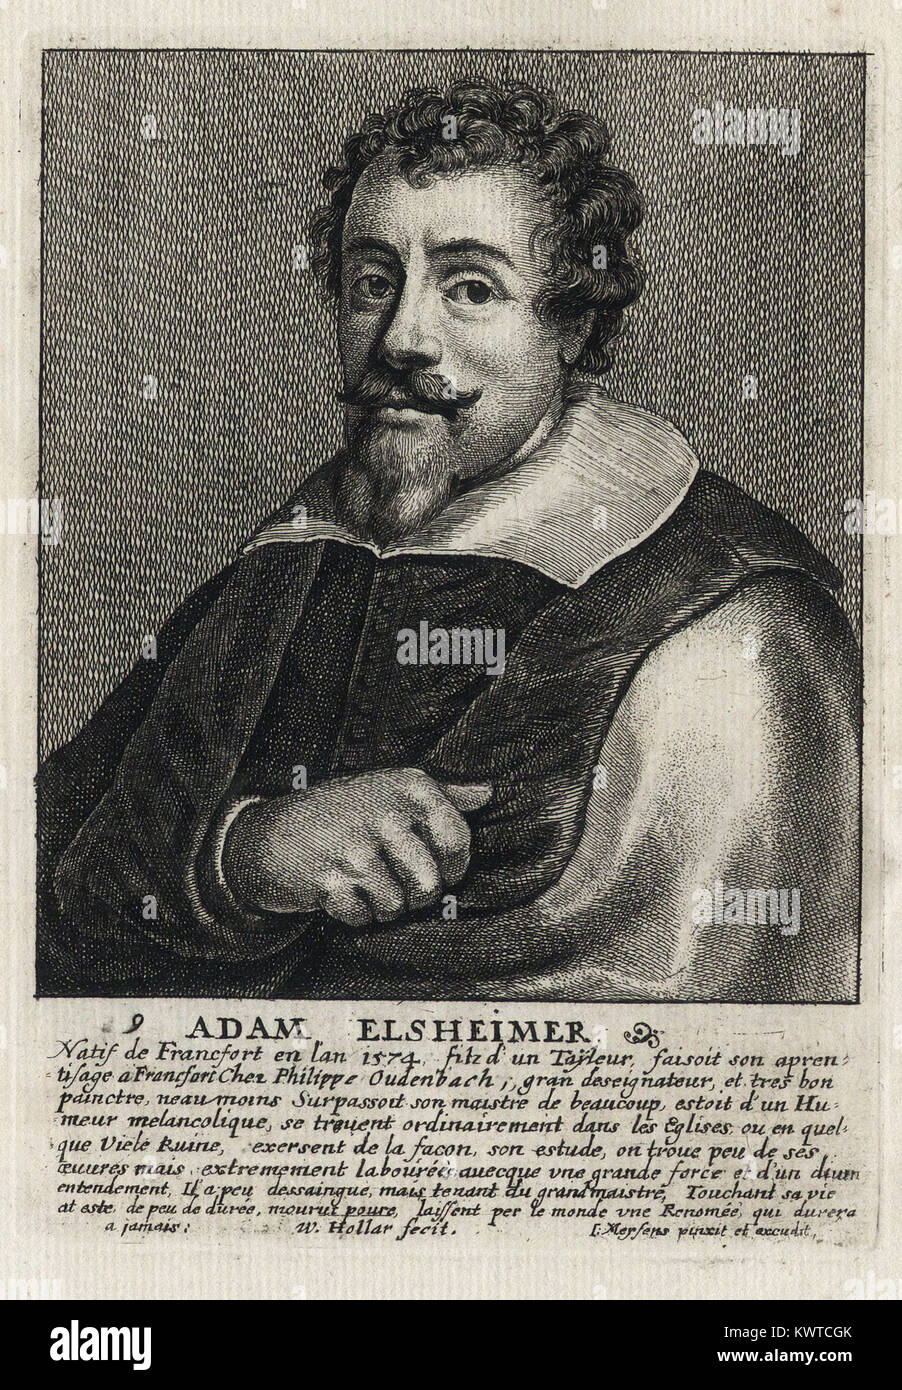 ADAM ELSHEIMER - Woodcut portrait and short biography (old french ...